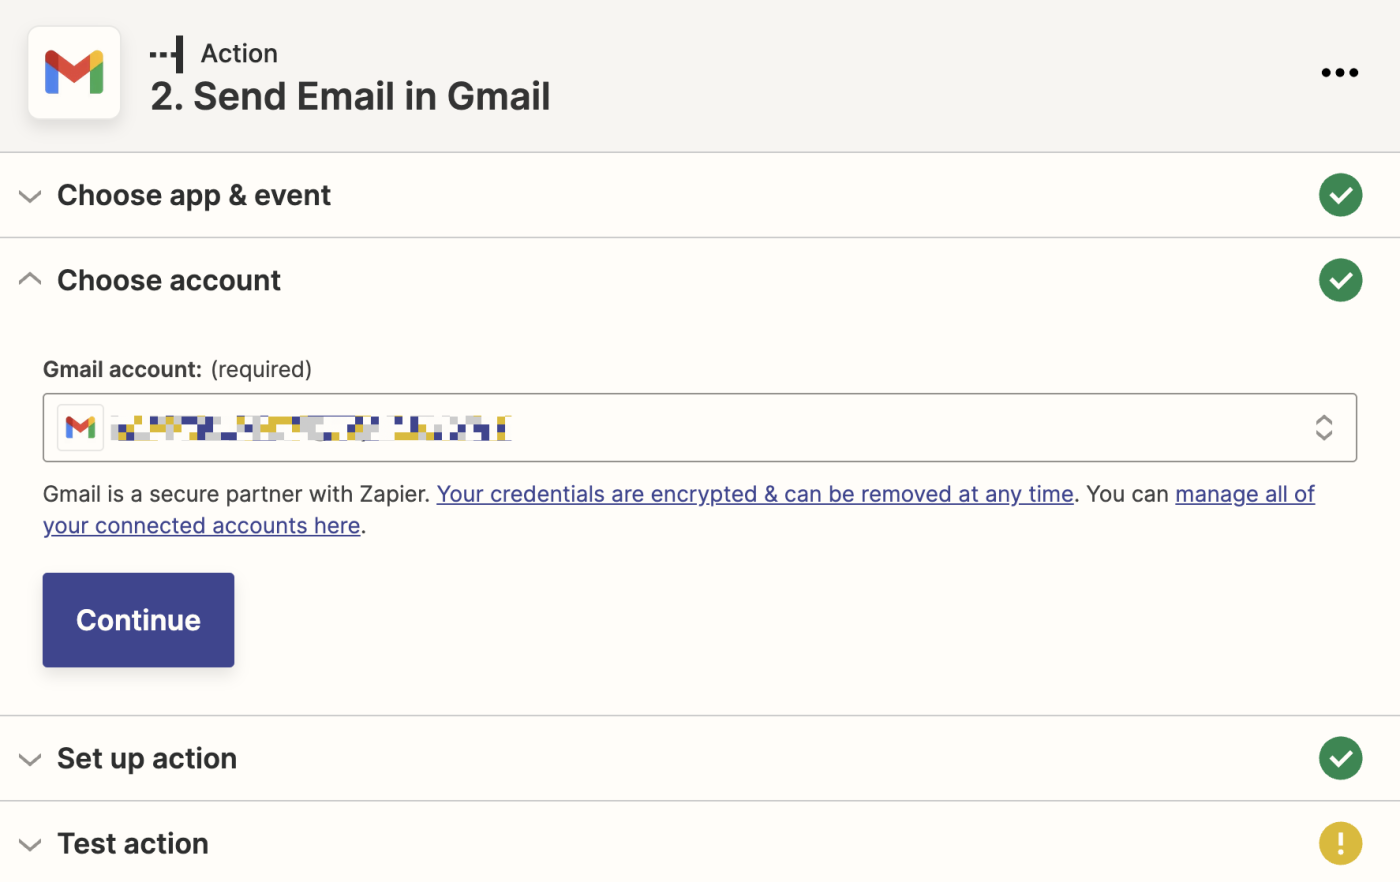 A Gmail account selected in the Gmail account field.